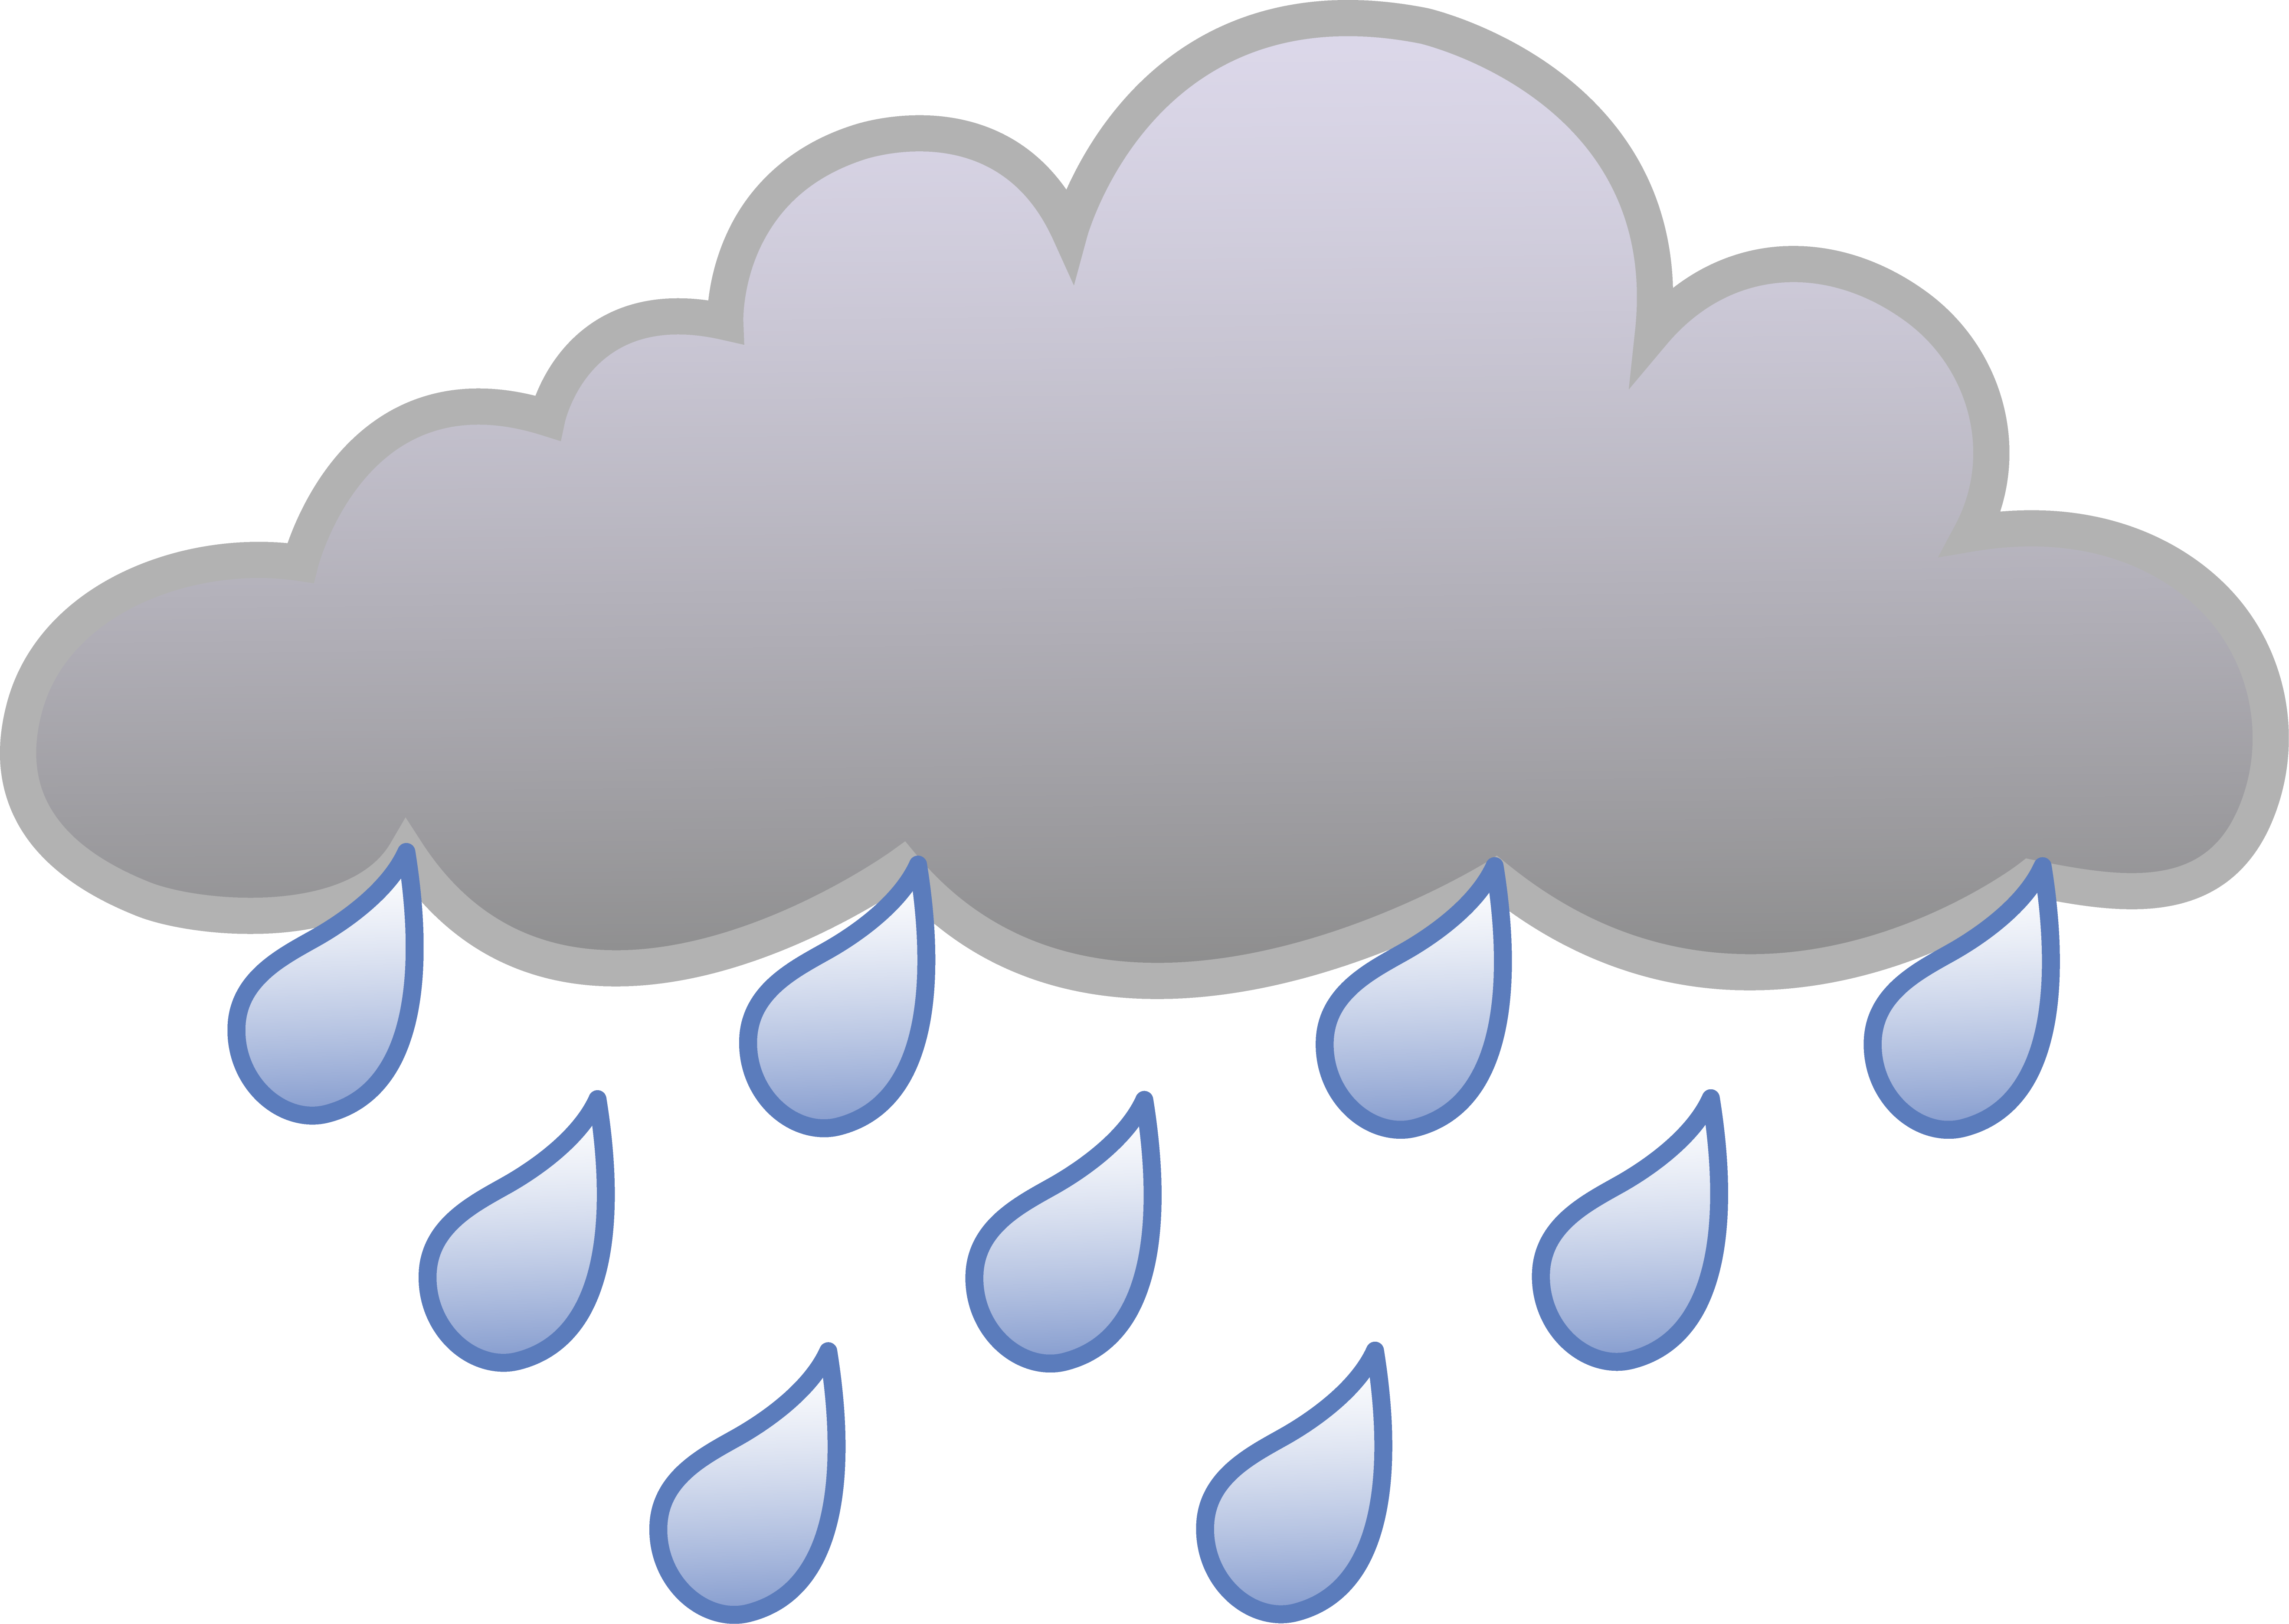 28 Cartoon Clouds And Rain Free Cliparts That You Can Download To You    